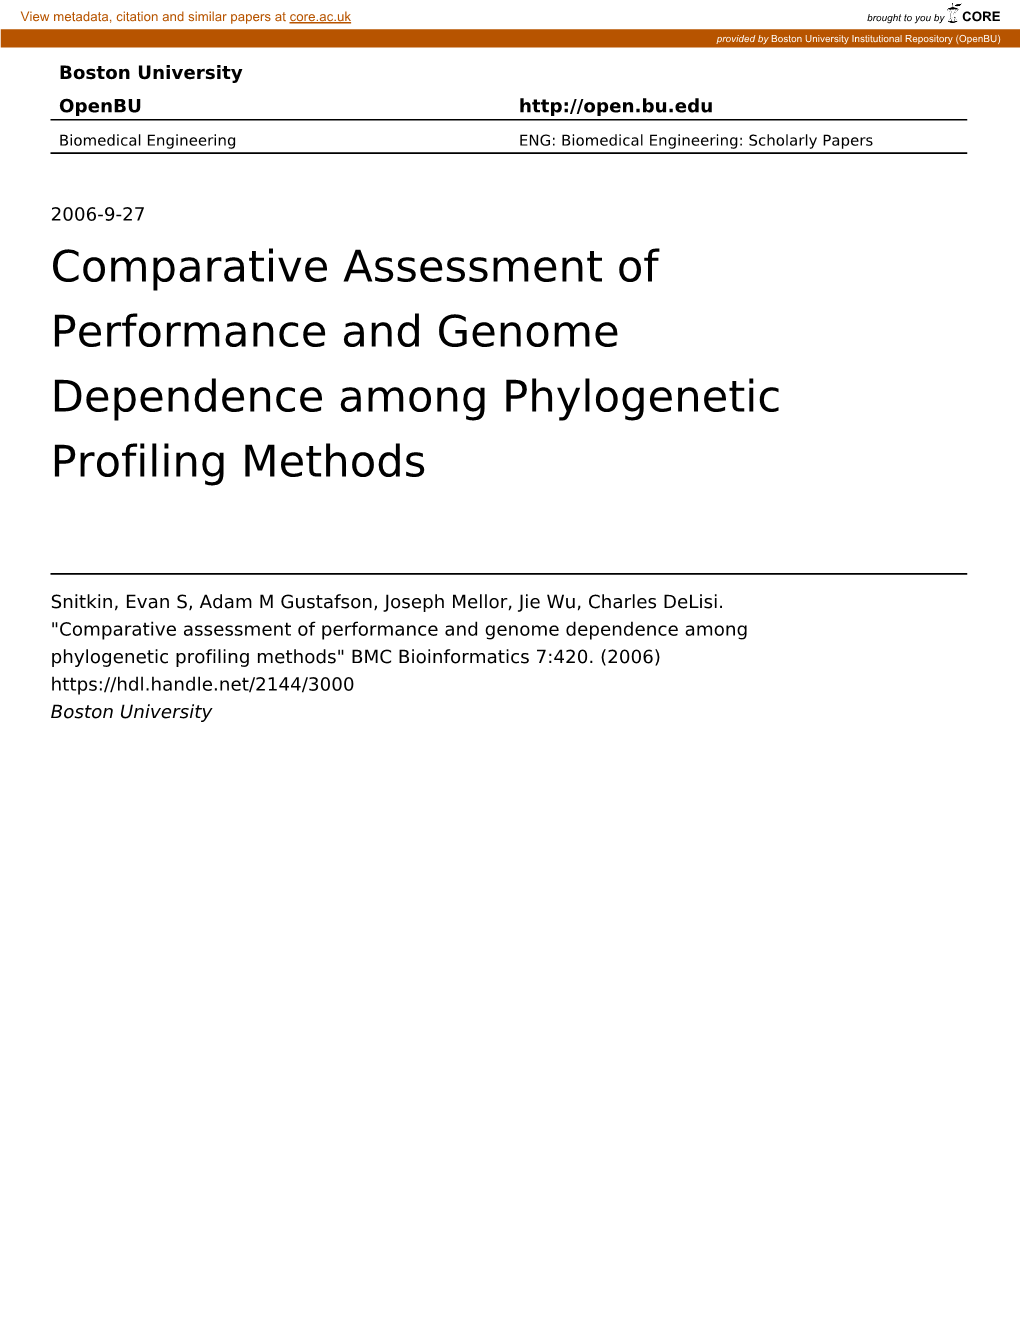 Comparative Assessment of Performance and Genome Dependence Among Phylogenetic Profiling Methods